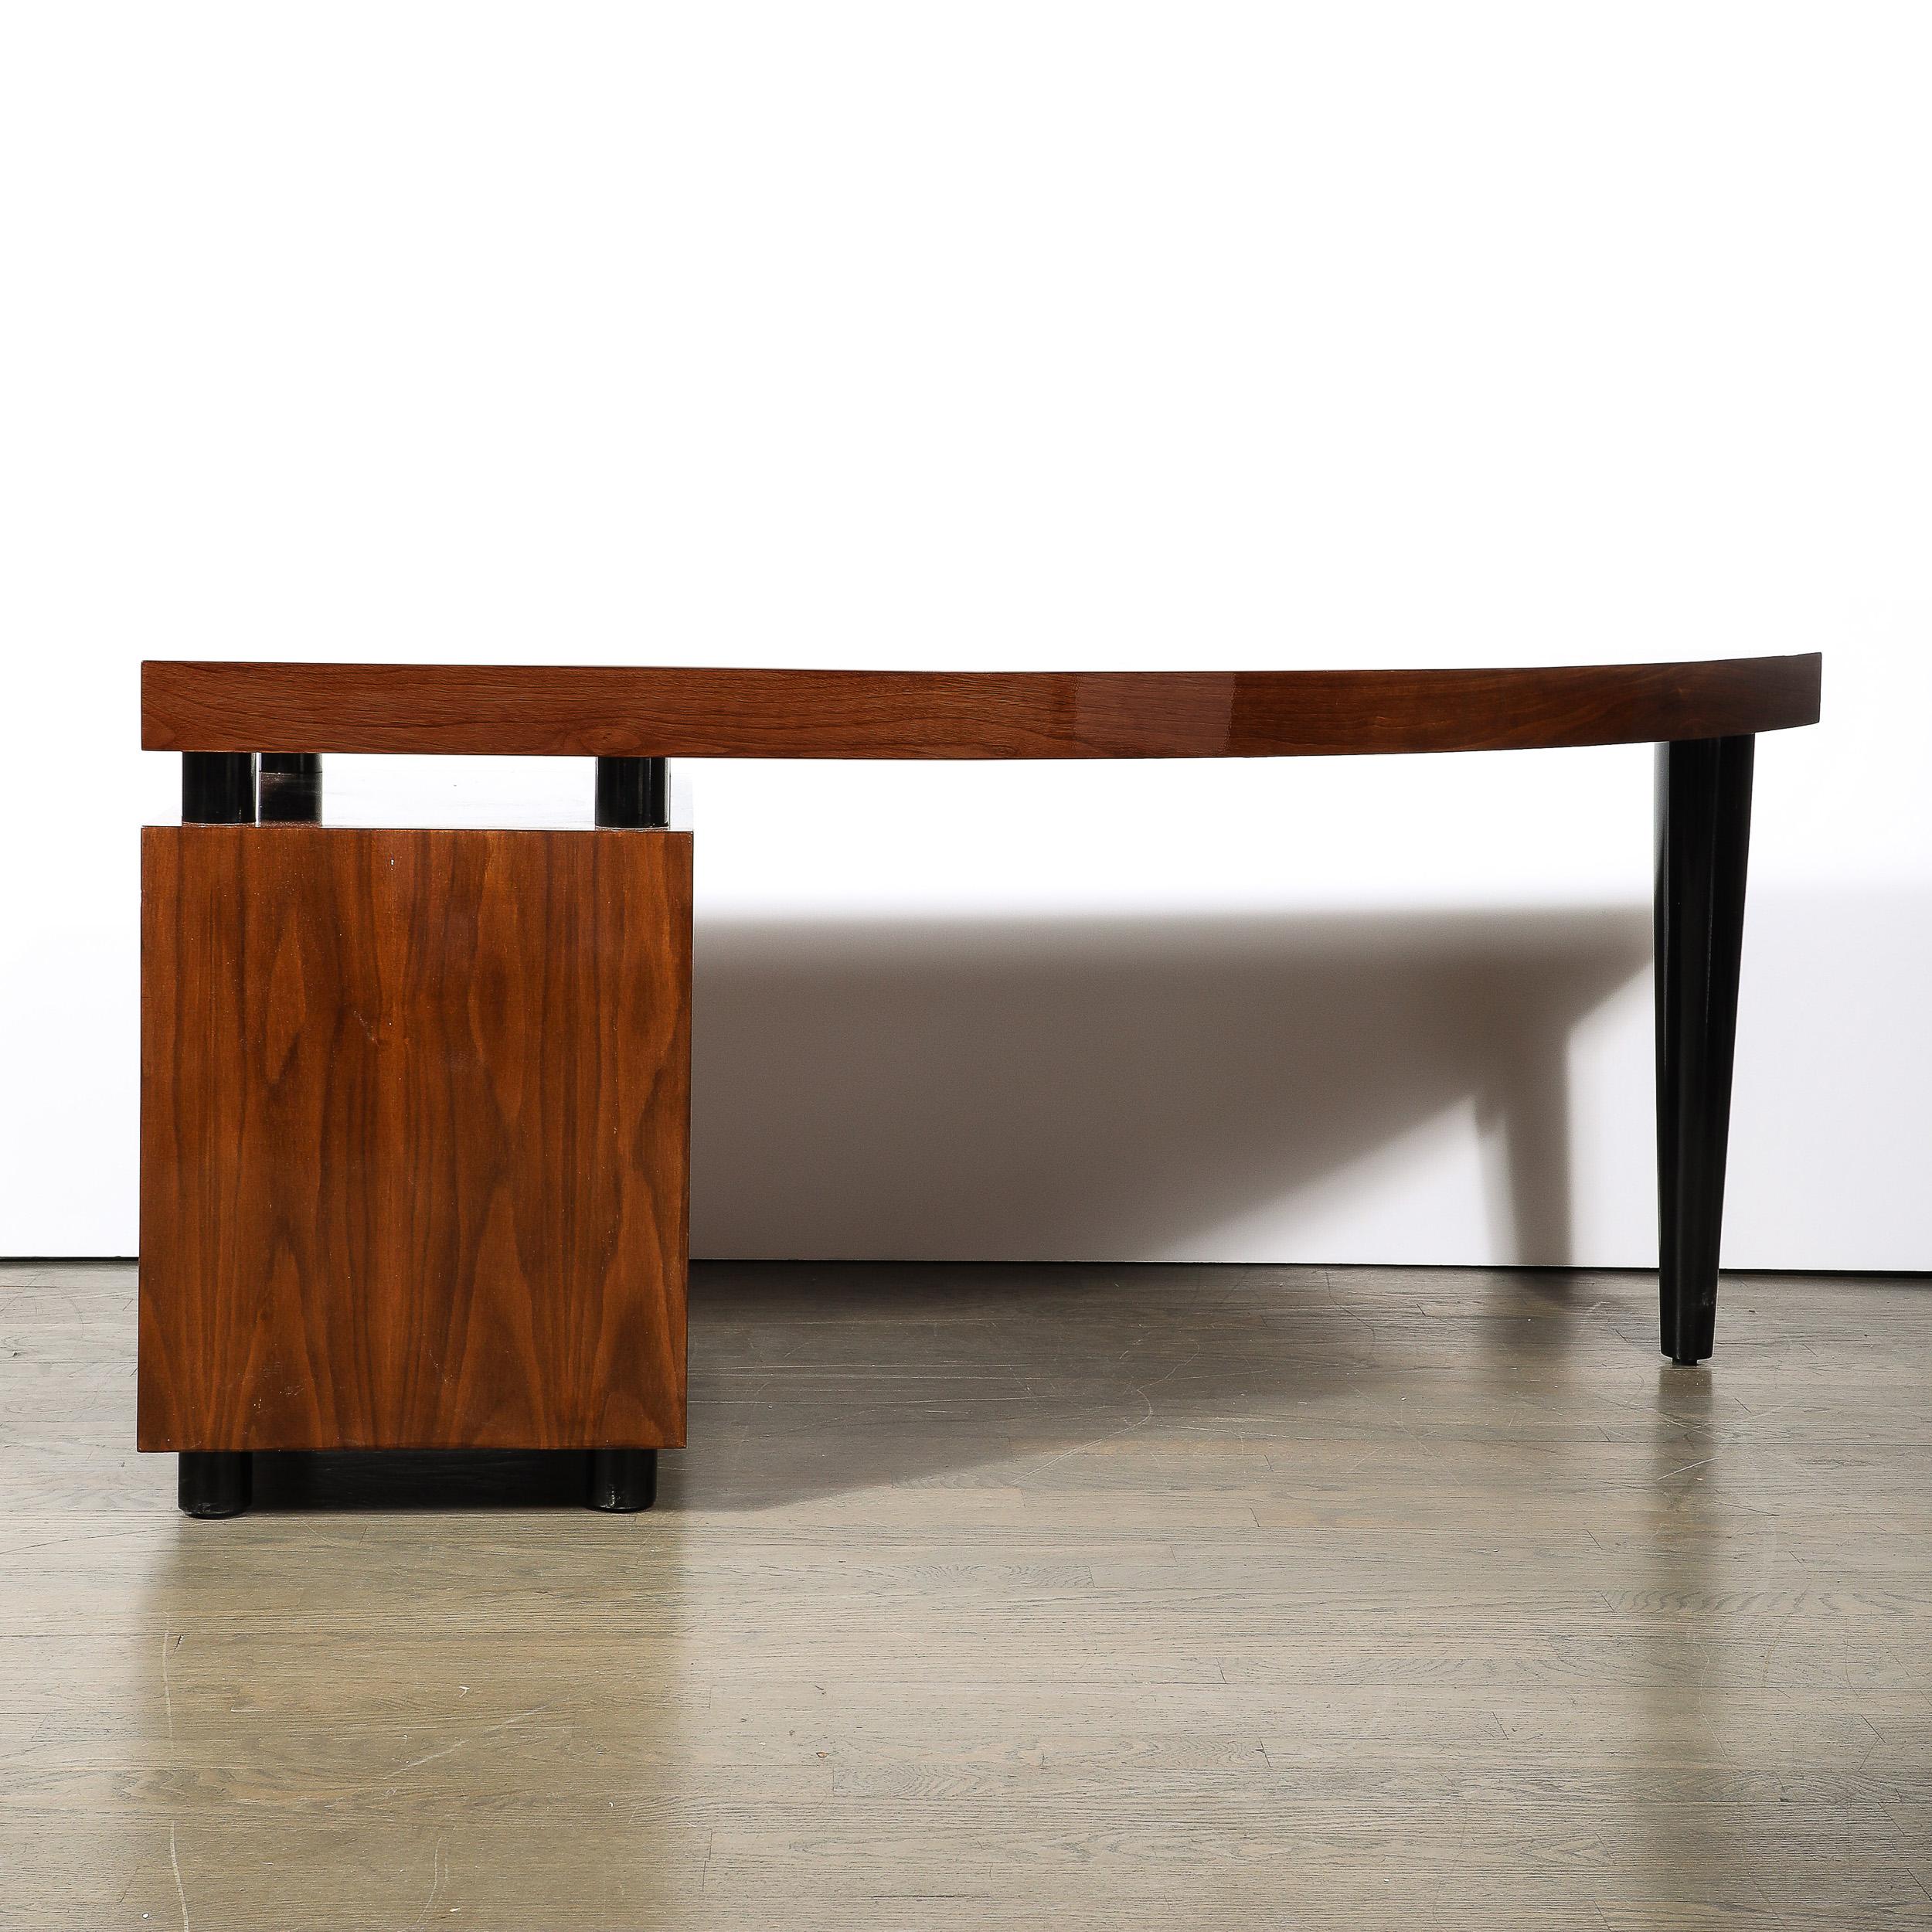 Late 20th Century Mid-Century Bookmatched Walnut W/ Tapered Leg Boca Desk by Leon Rosen for Pace